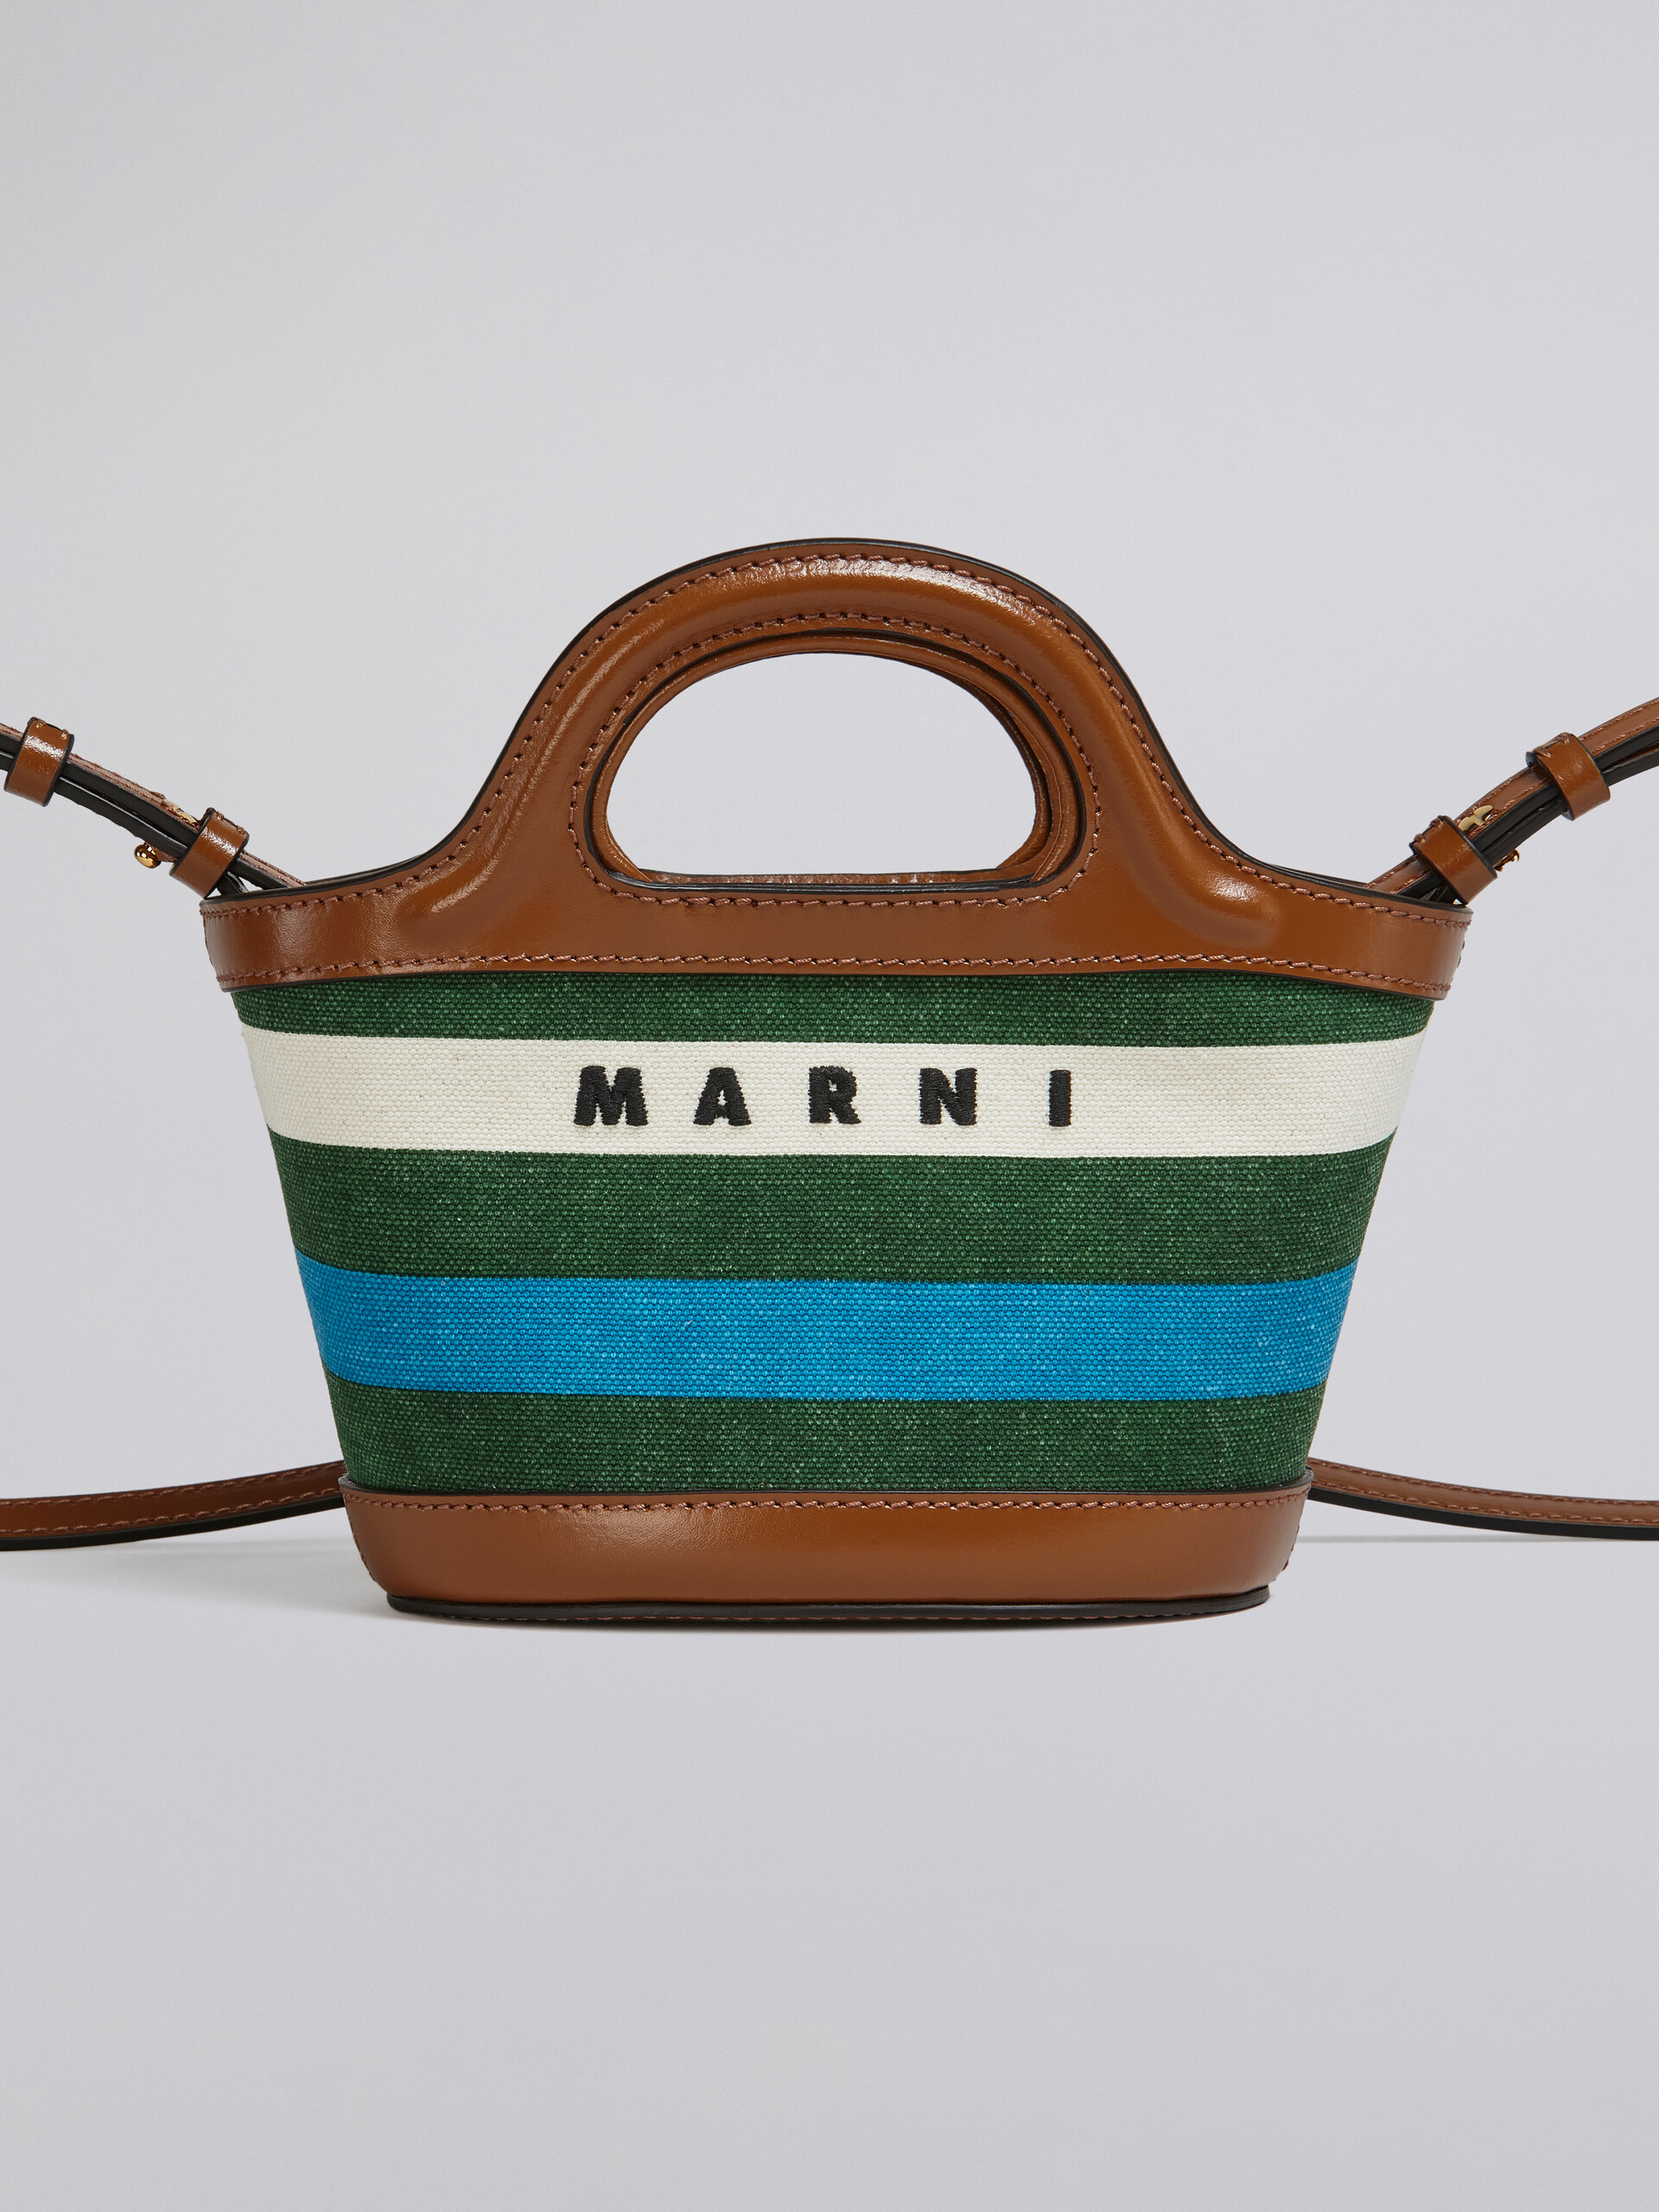 TROPICALIA micro bag in leather and striped canvas - Handbag - Image 5